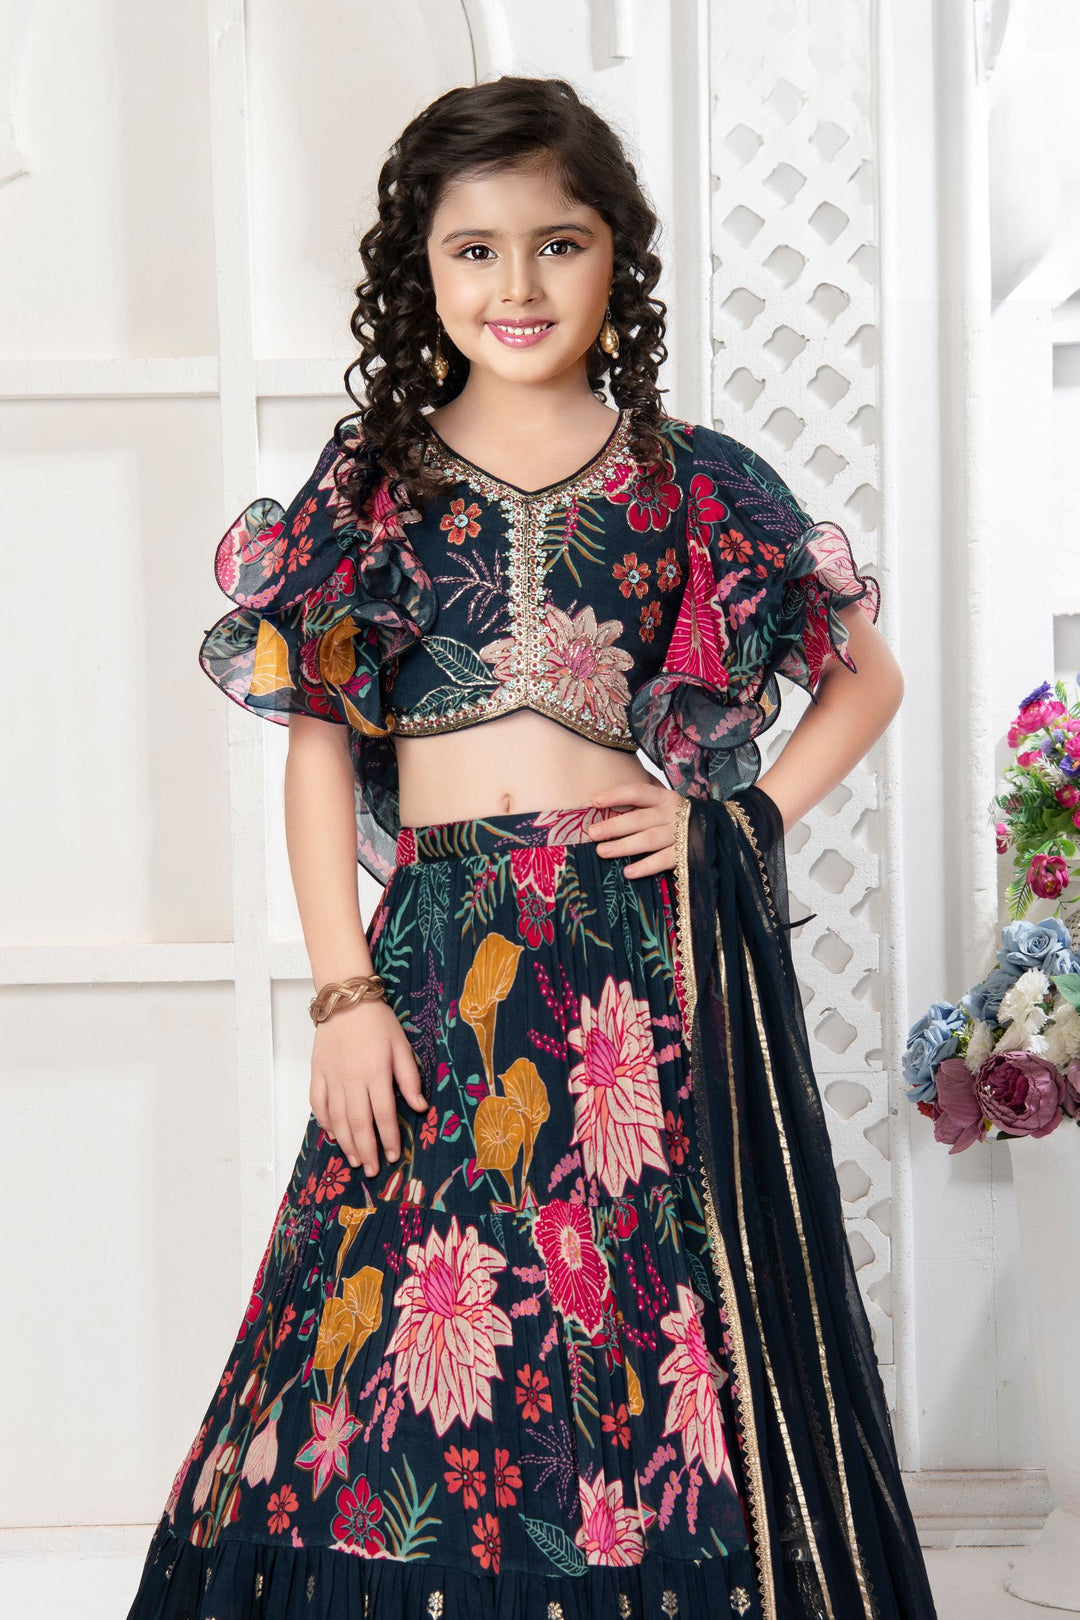 Navy Blue Beads and Sequins work with Floral Print Lehenga Choli for Girls